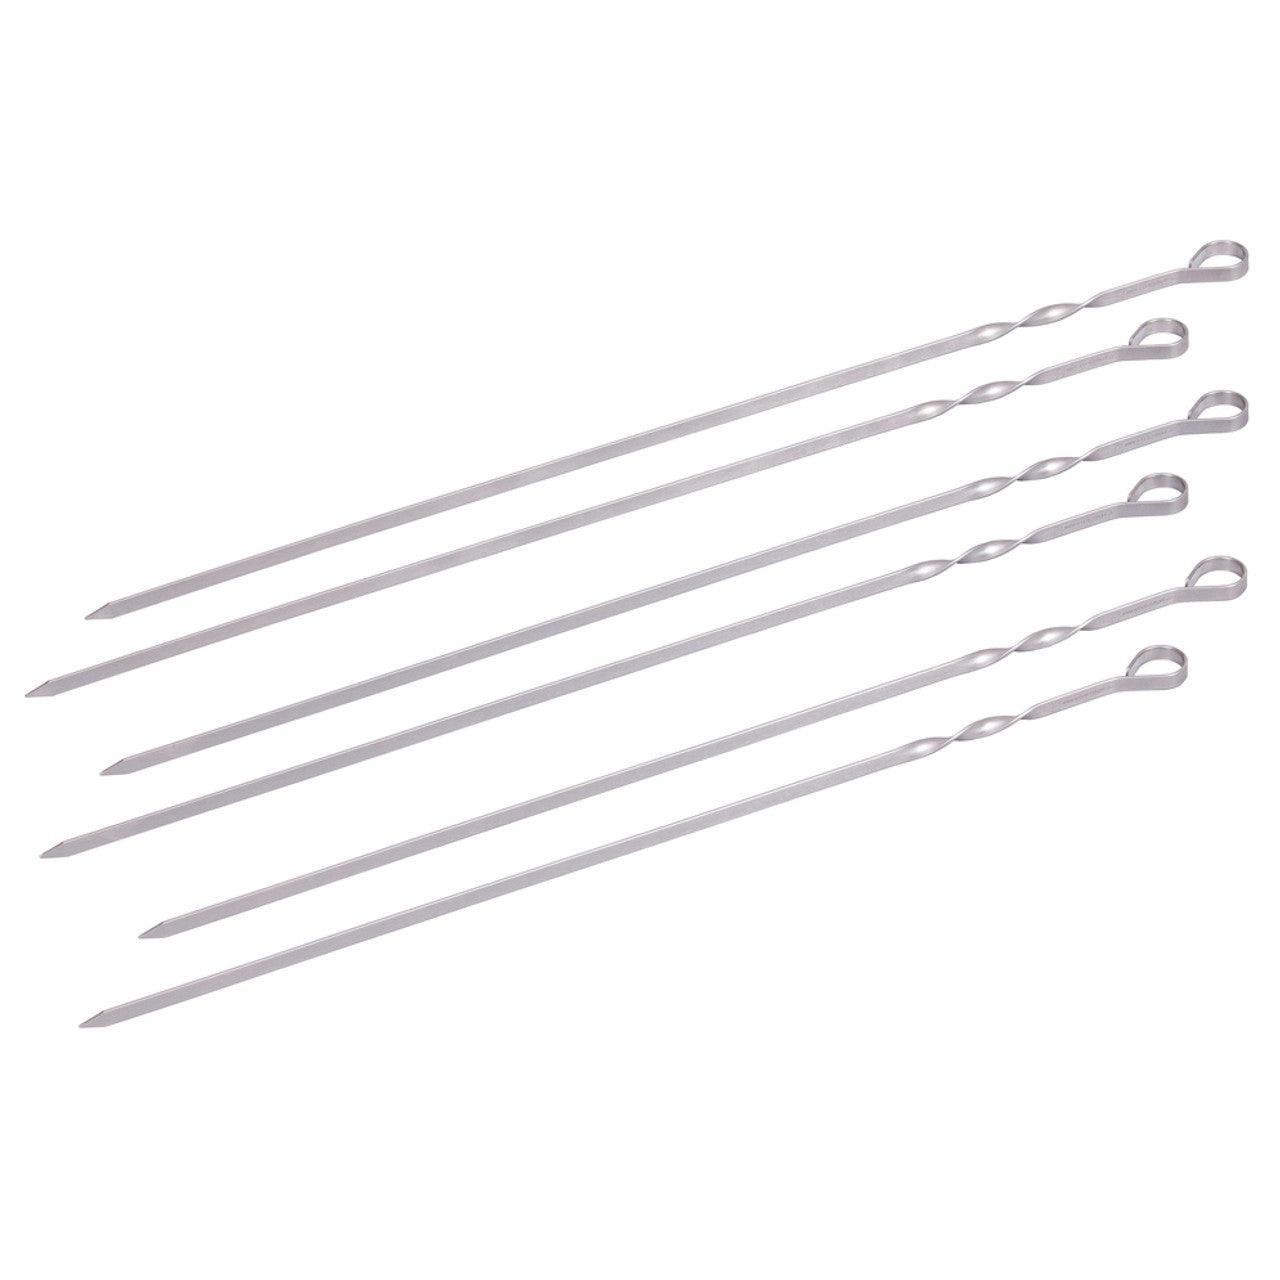 7 x Skewer Set for Monolith Classic Rotisserie - BBQ Land